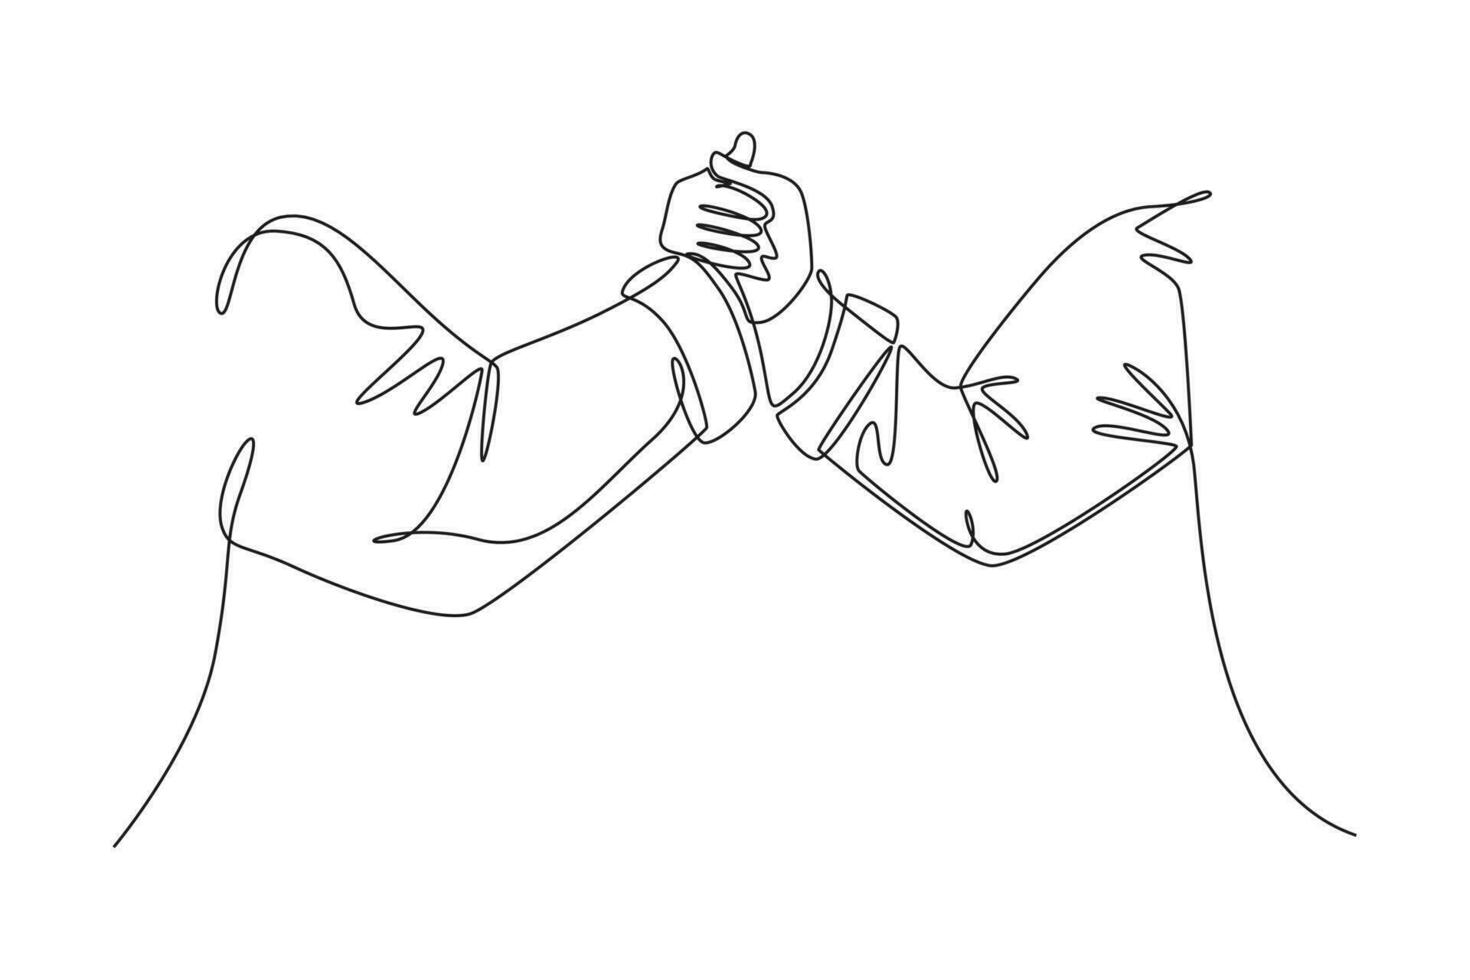 Continuous one line drawing hand of two businessmen gesture handshaking his business partner. Great teamwork. Business deal or cooperation concept. Single line draw design vector graphic illustration